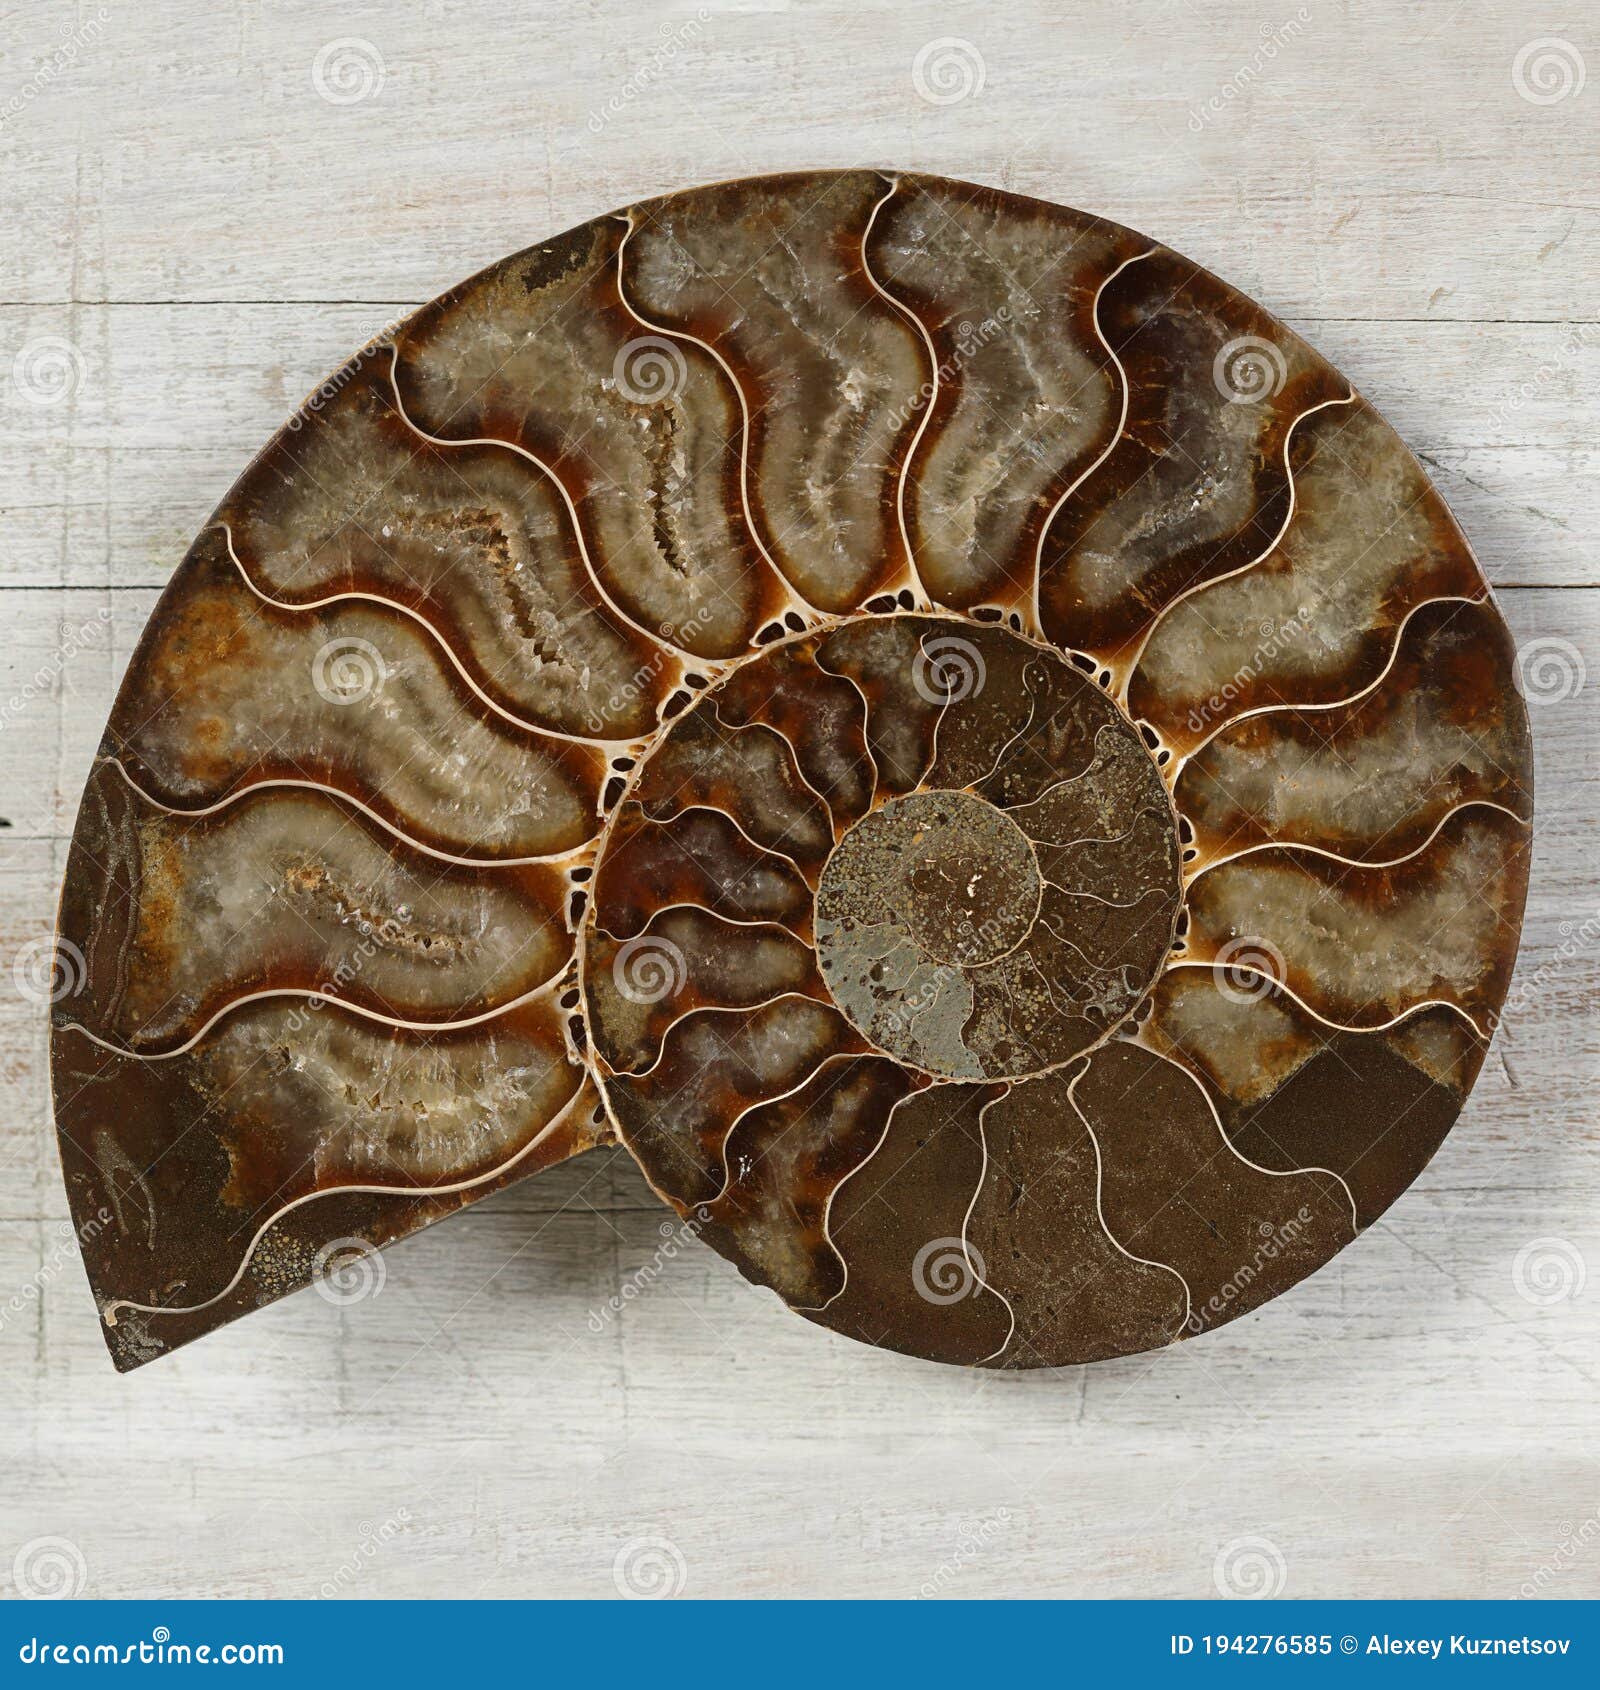 fossilized ammonite - ancient mollusc of the order cephalopods